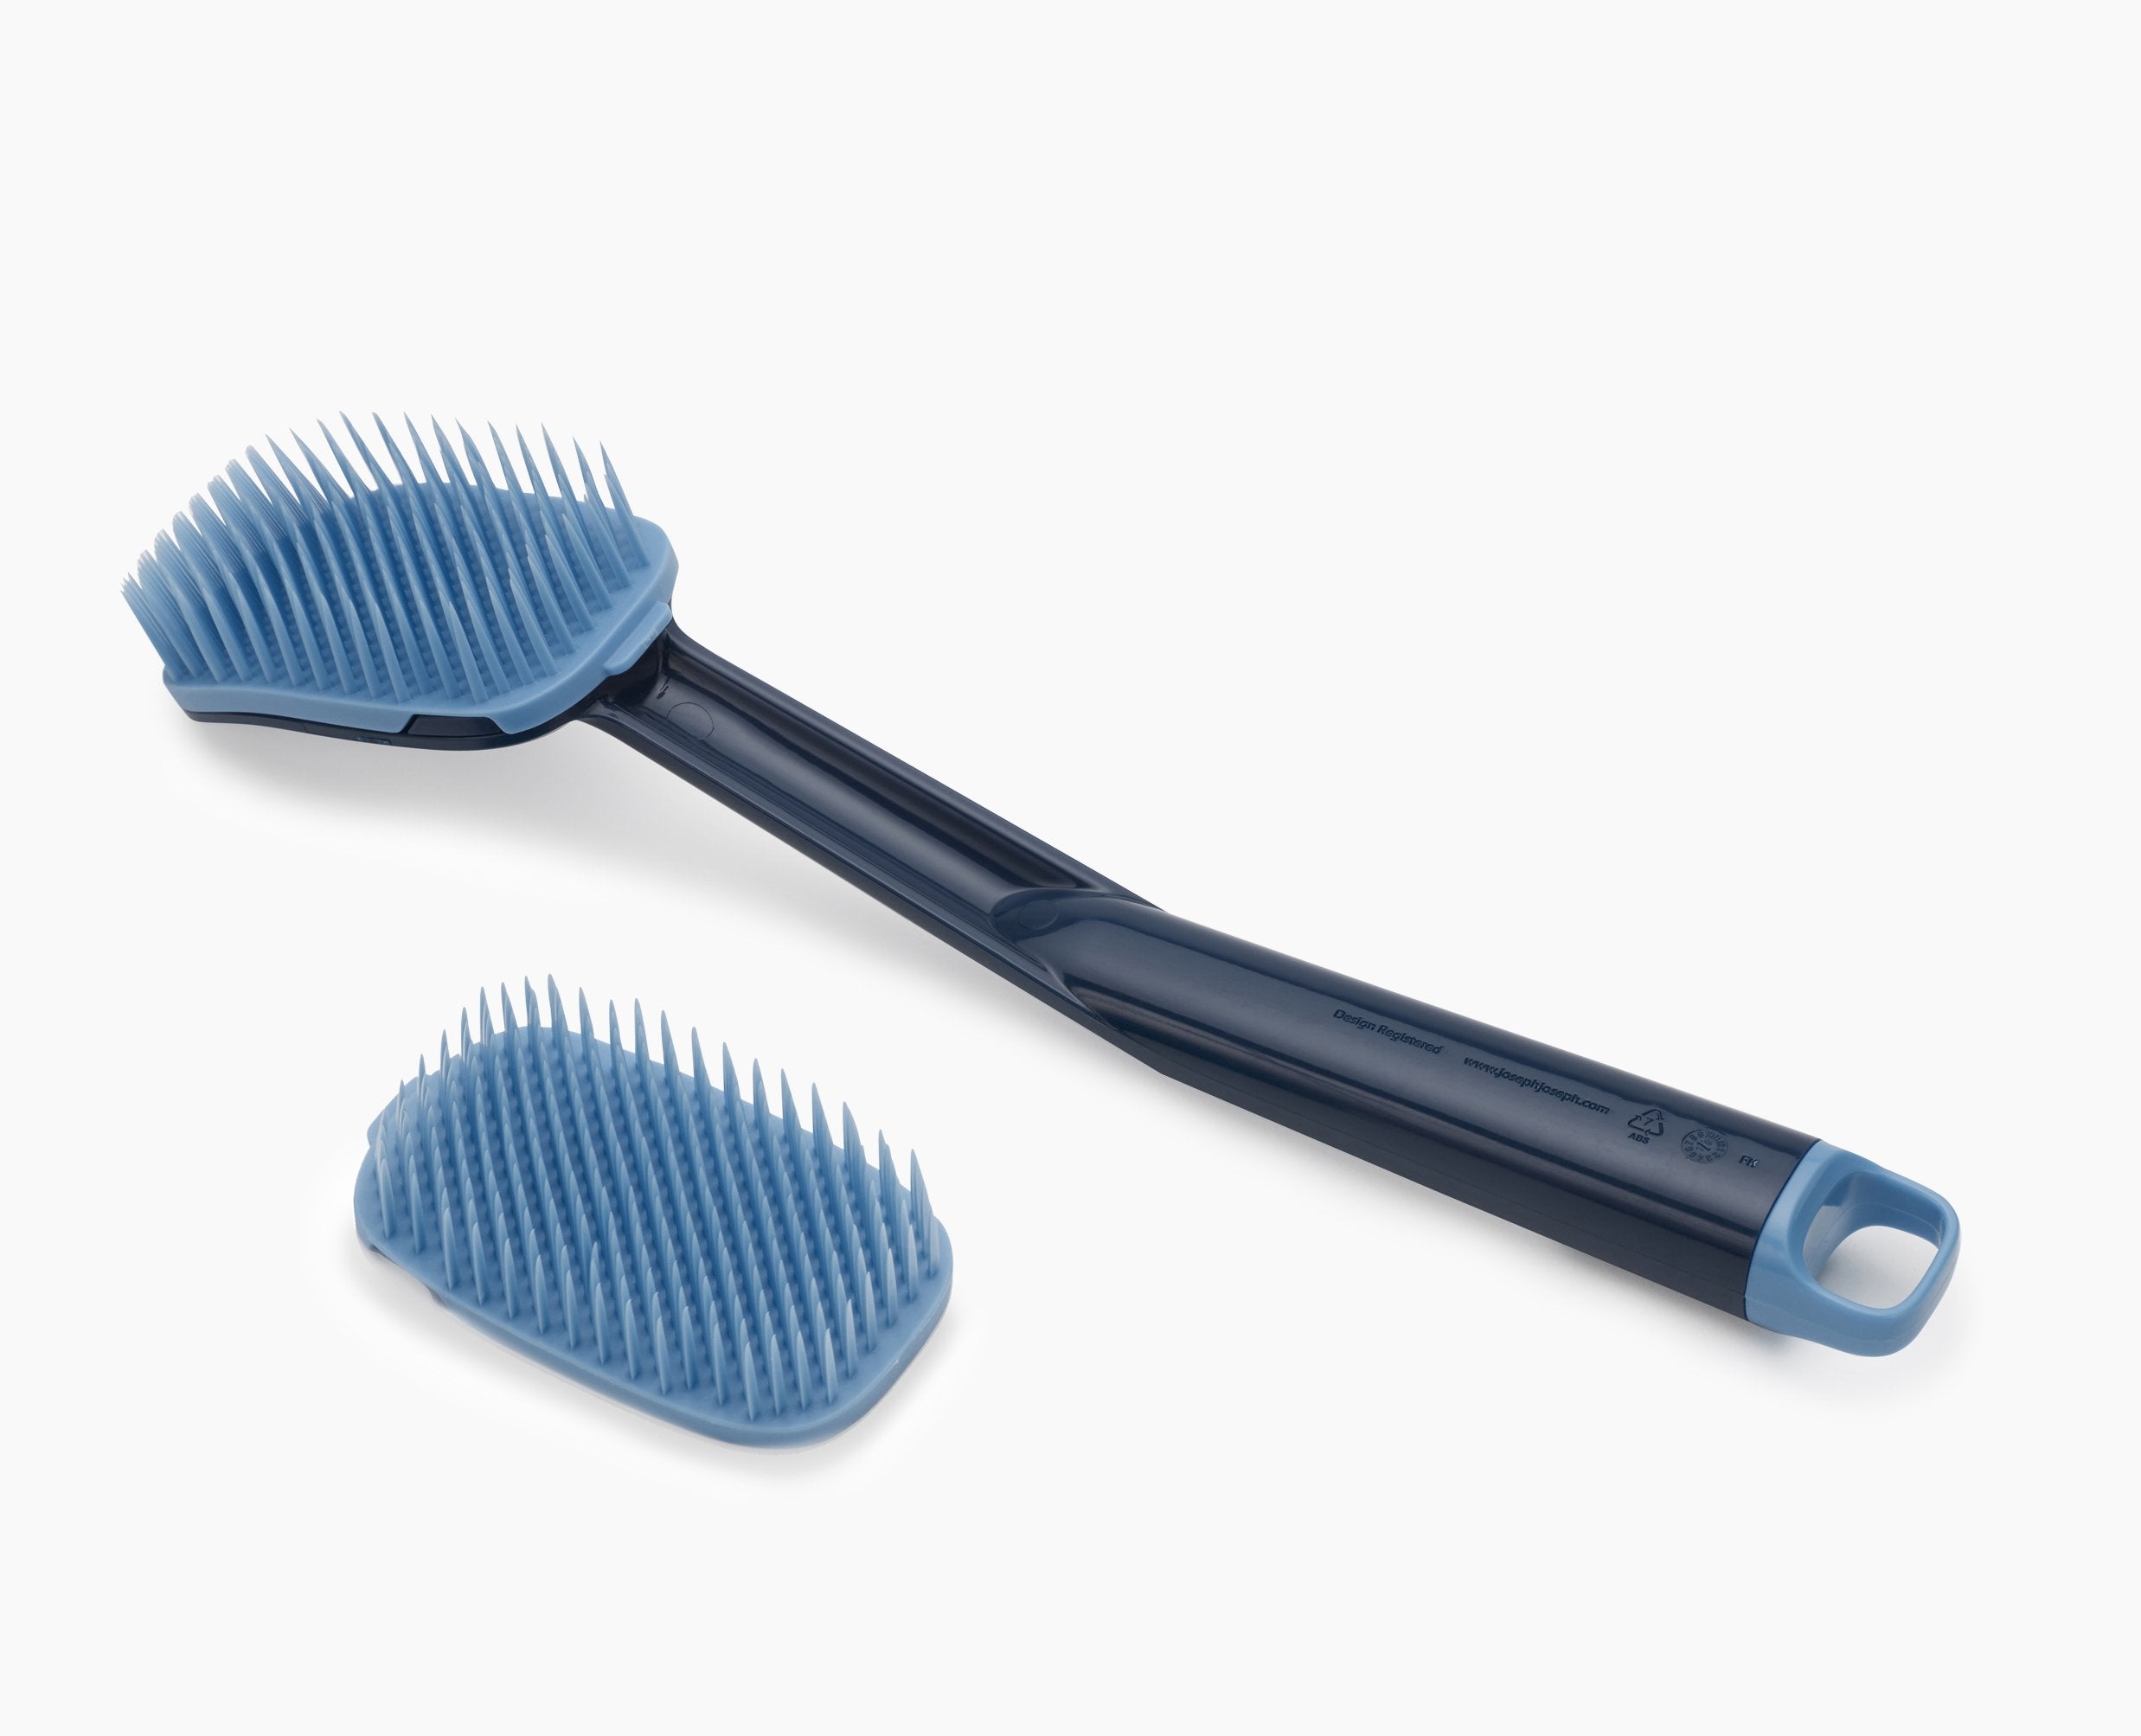 BEON.COM.AU  This innovative washing-up brush features advanced polymer bristles that drain and dry quickly, are durable and flexible for effective cleaning and rinse clean after use.  Quick drying Stiff bristles for effective cleaning Safe on non-stick cookware Easy to rinse clean 100% recyclable Comes with... Joseph Joseph at BEON.COM.AU